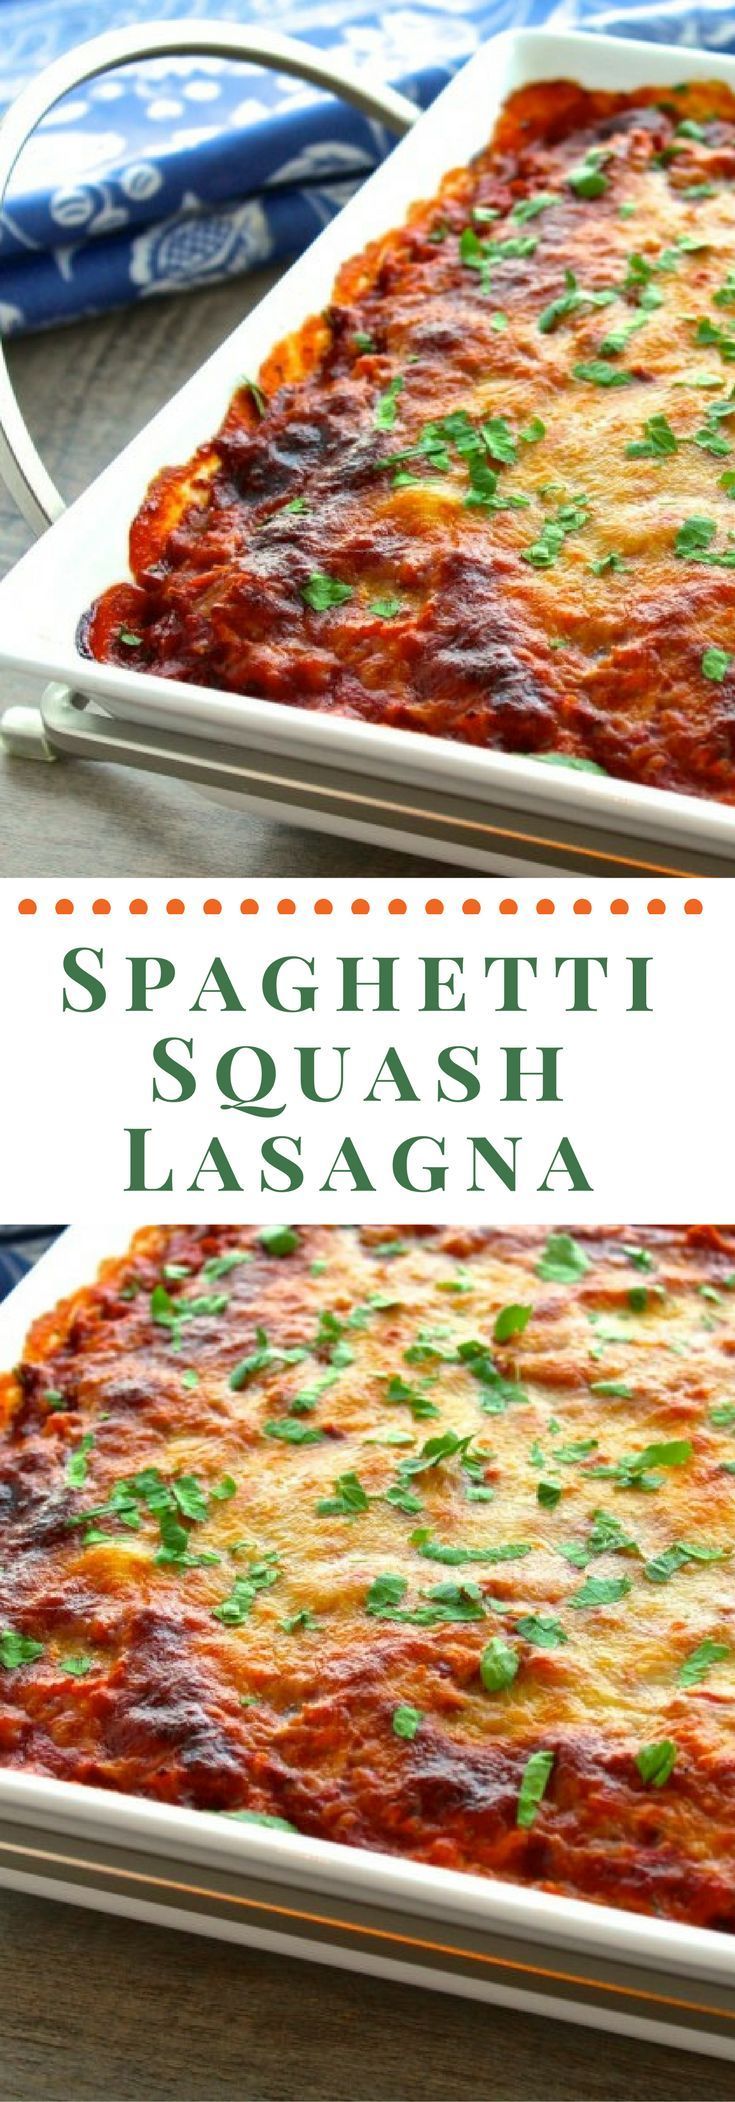 Spaghetti Squash Lasagne. Healthy, easy, with tips for how to cook a spaghetti squash.